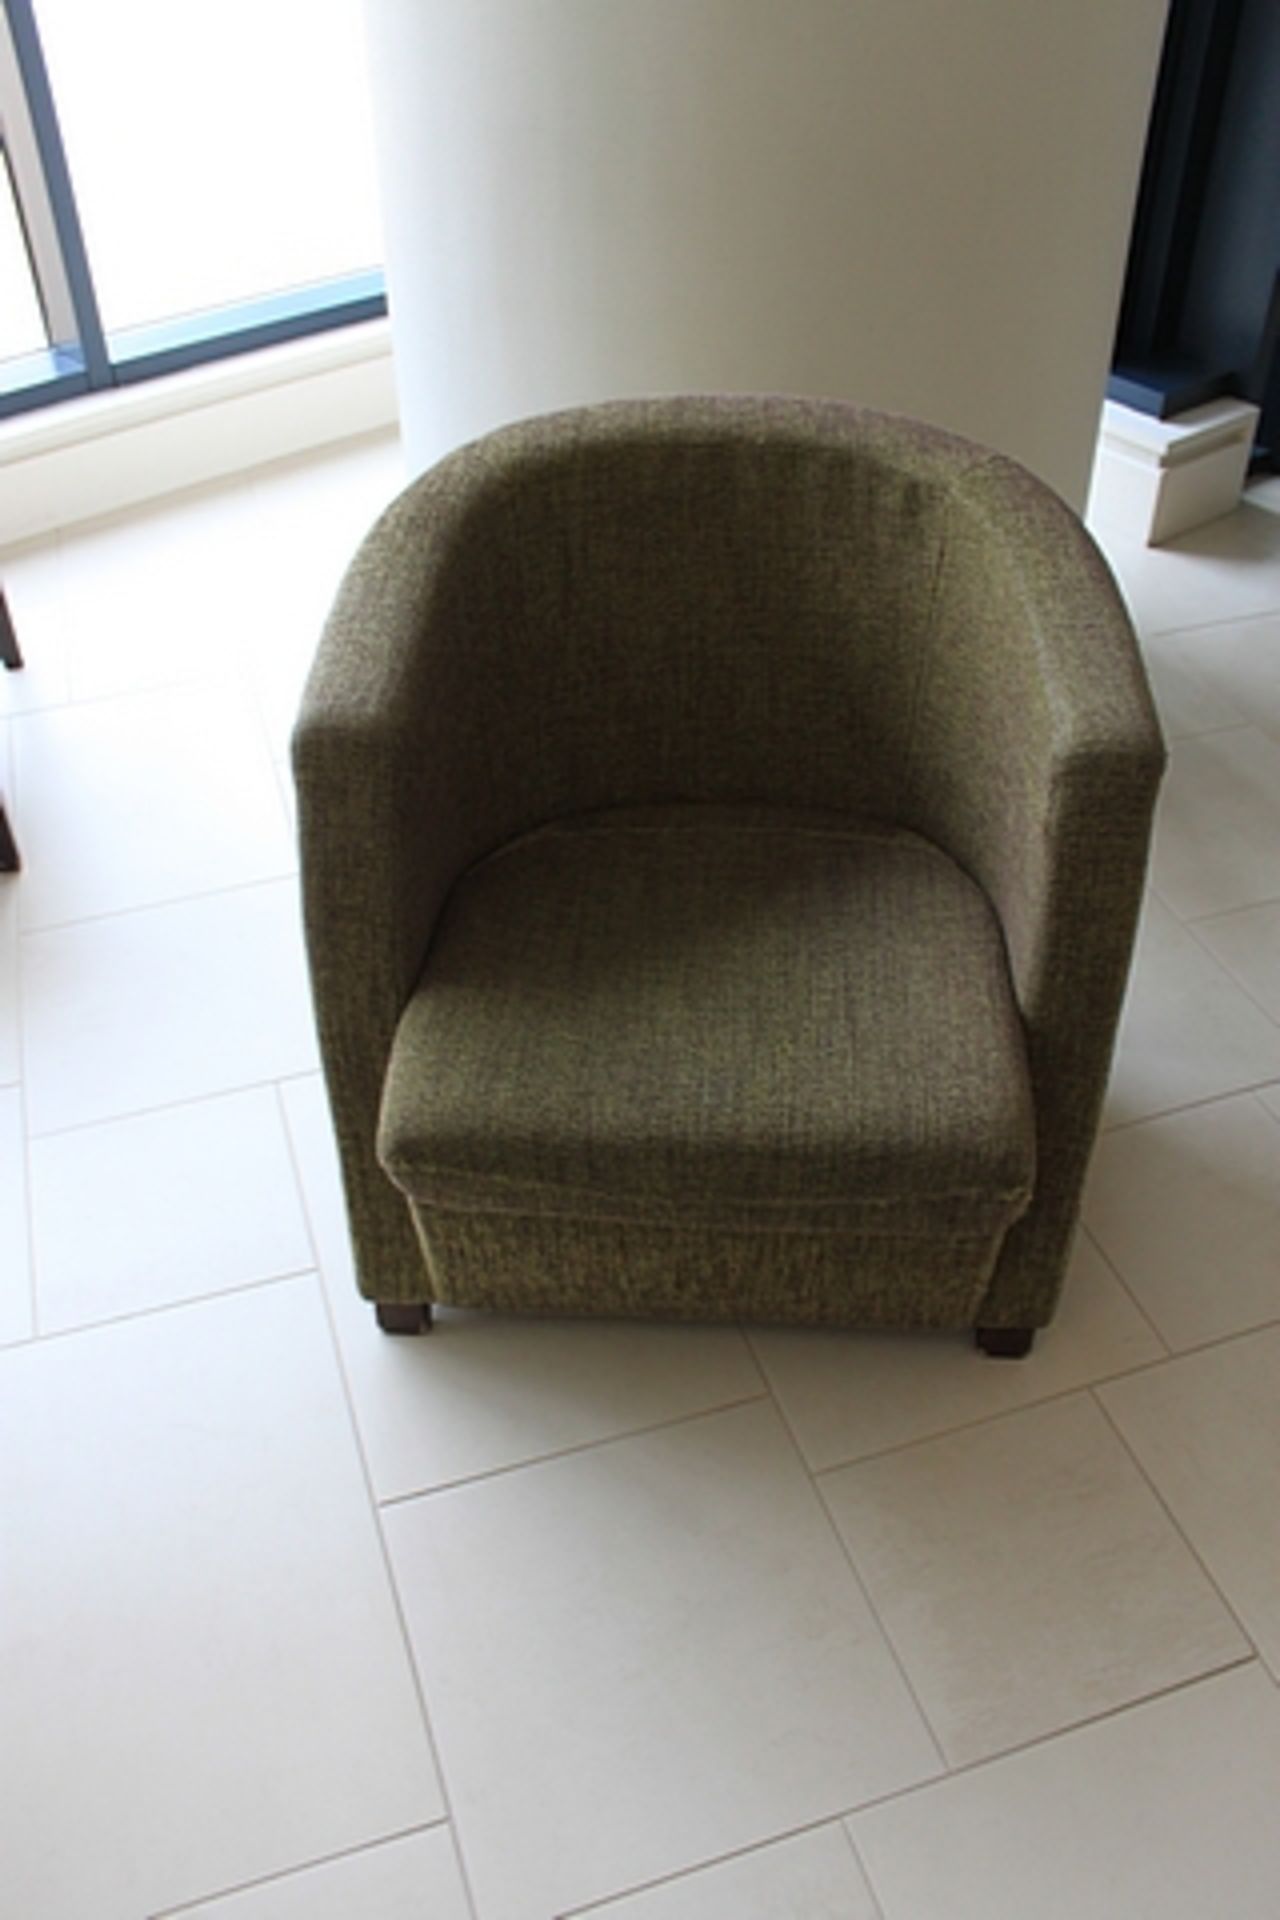 2 x Kesterport AS Tub Chair Wood Crest To Back Fully Upholstered With Wood Feet CMHR Fire - Image 2 of 4